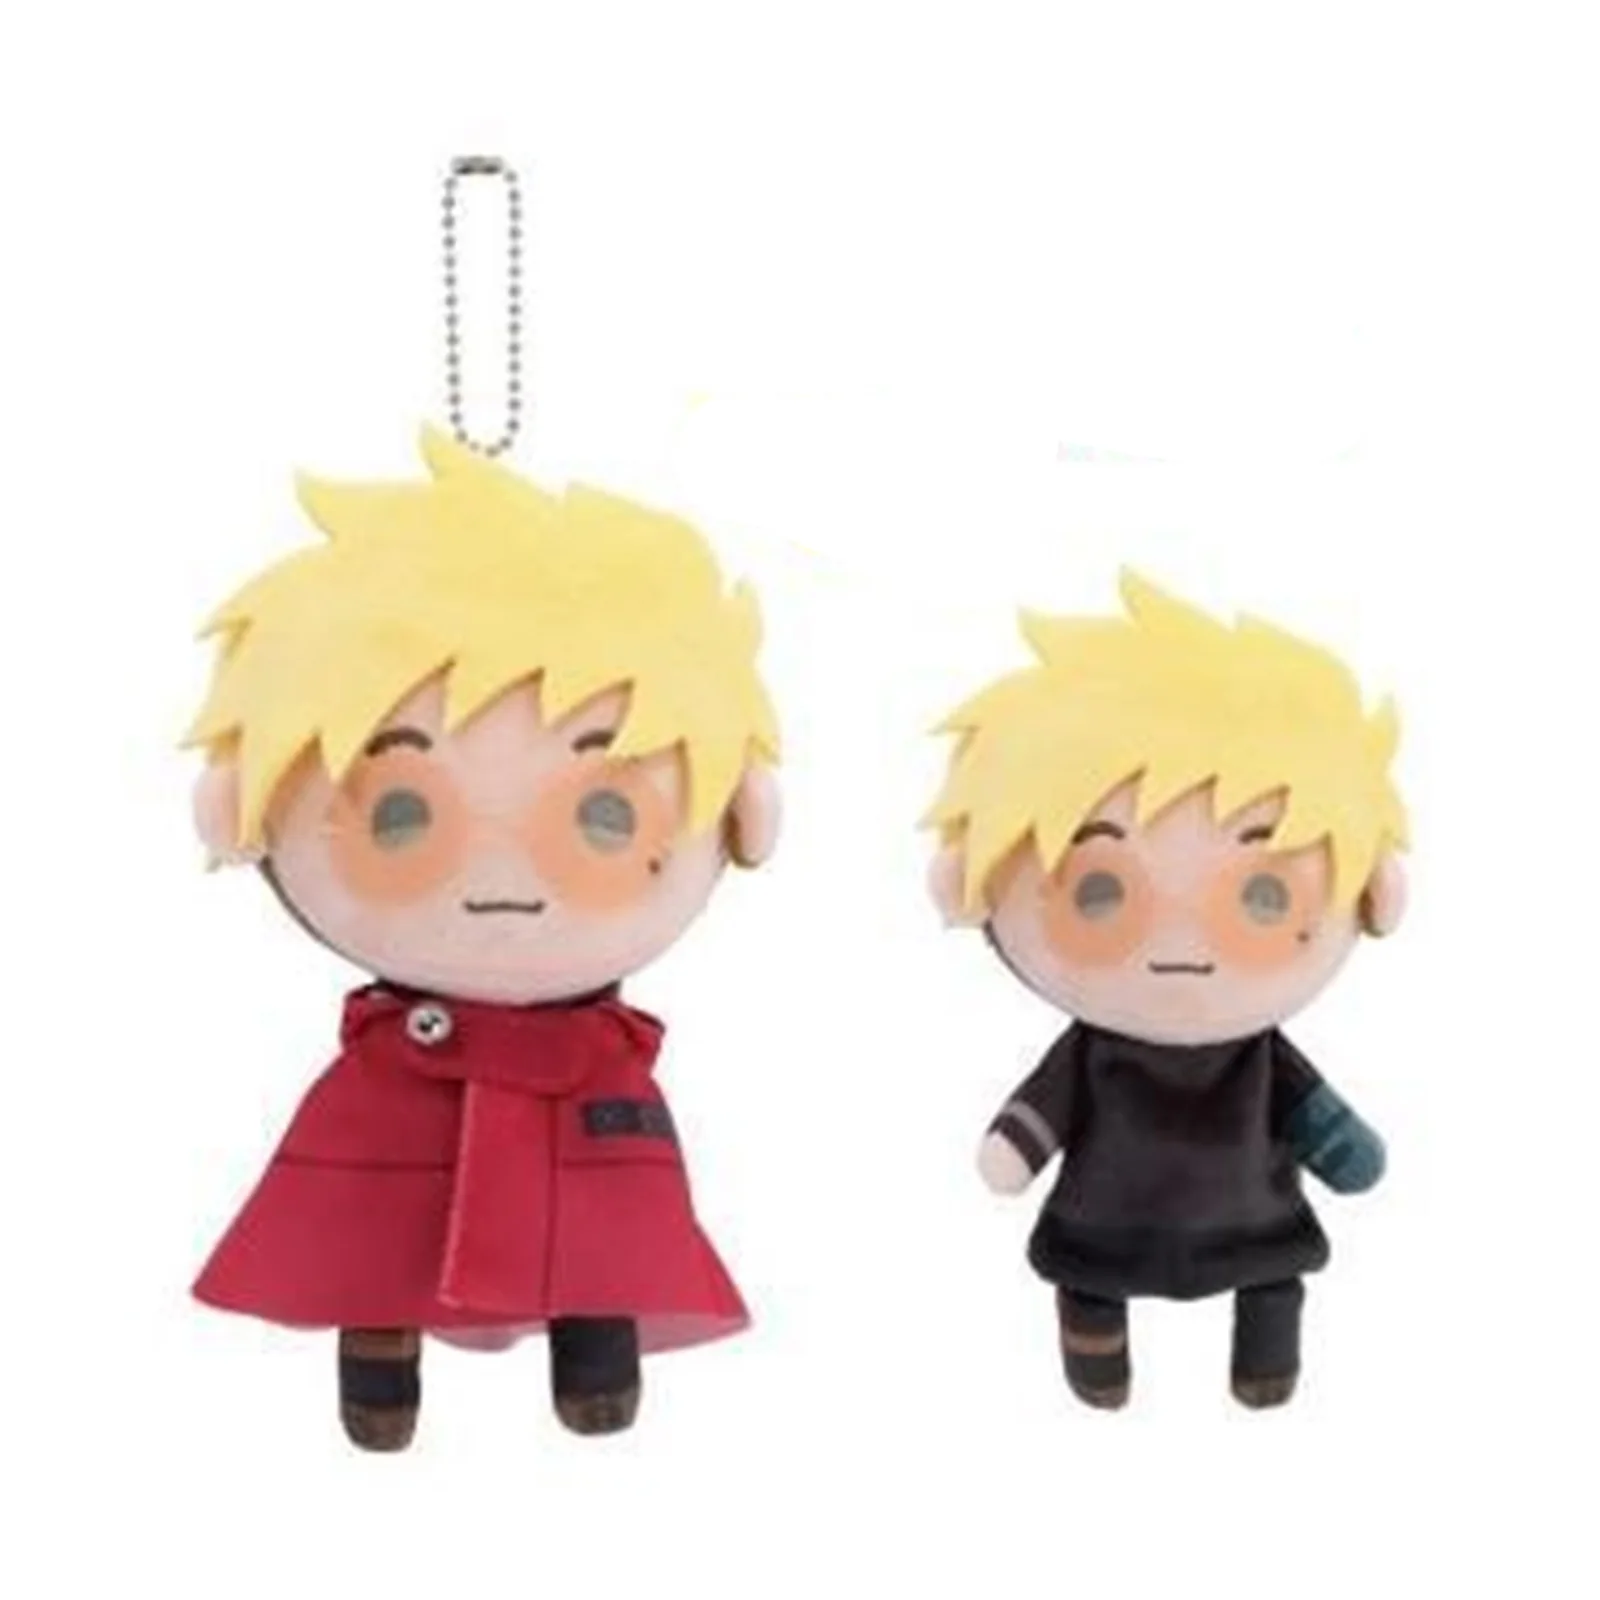 anime-vash-the-stampede-cosplay-trigun-cosplay-costume-for-kids-15cm-plush-doll-toy-halloween-children-gift-carnival